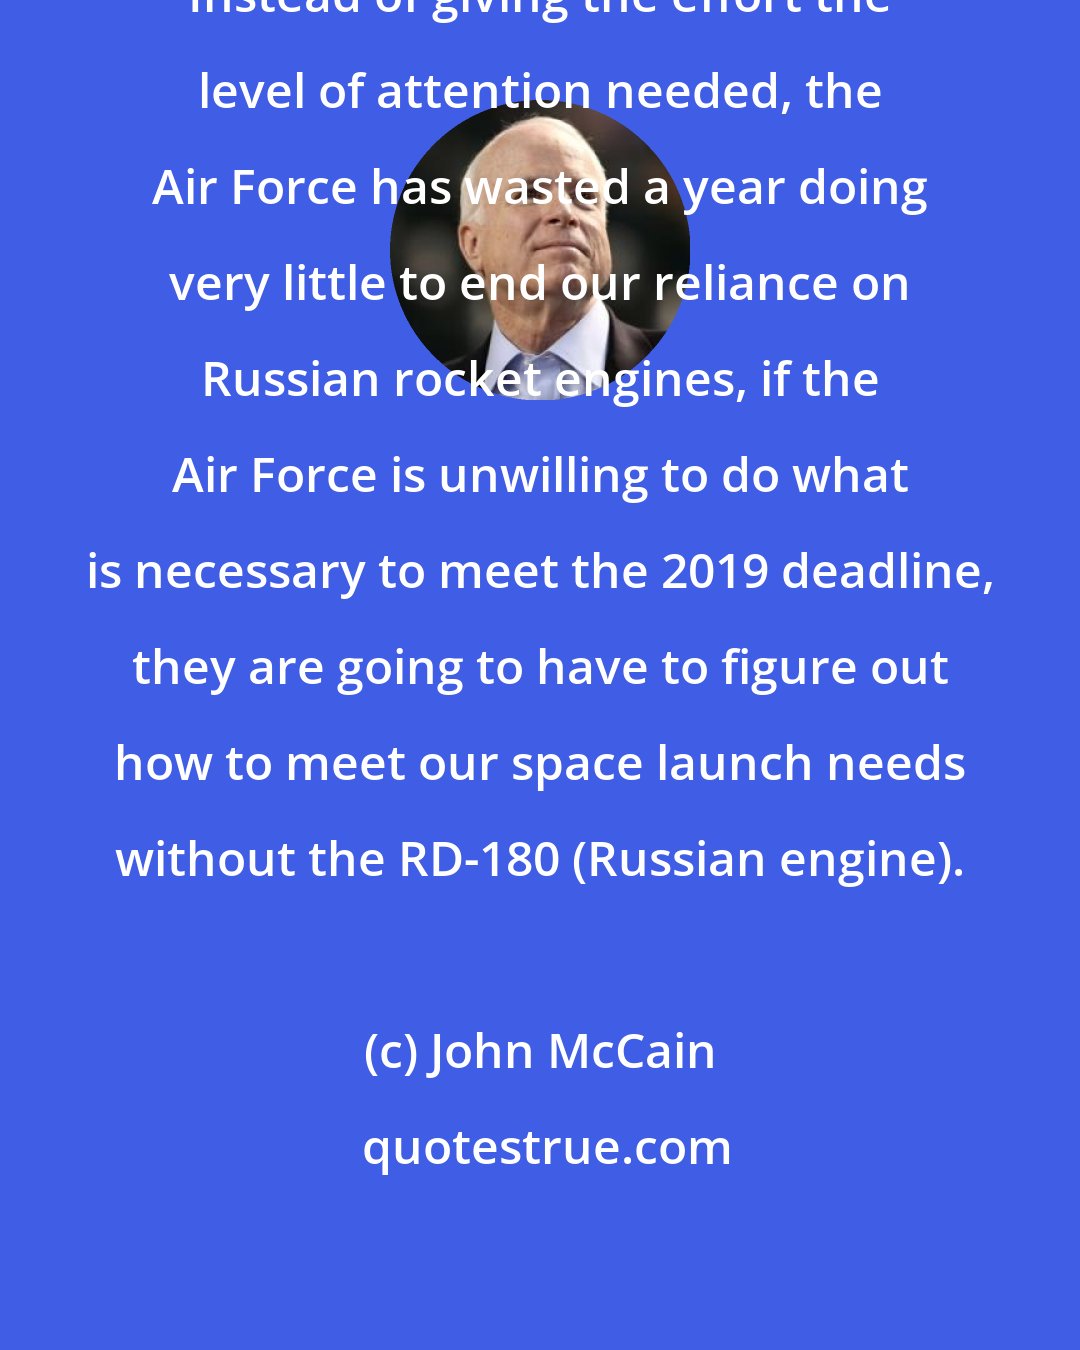 John McCain: Instead of giving the effort the level of attention needed, the Air Force has wasted a year doing very little to end our reliance on Russian rocket engines, if the Air Force is unwilling to do what is necessary to meet the 2019 deadline, they are going to have to figure out how to meet our space launch needs without the RD-180 (Russian engine).